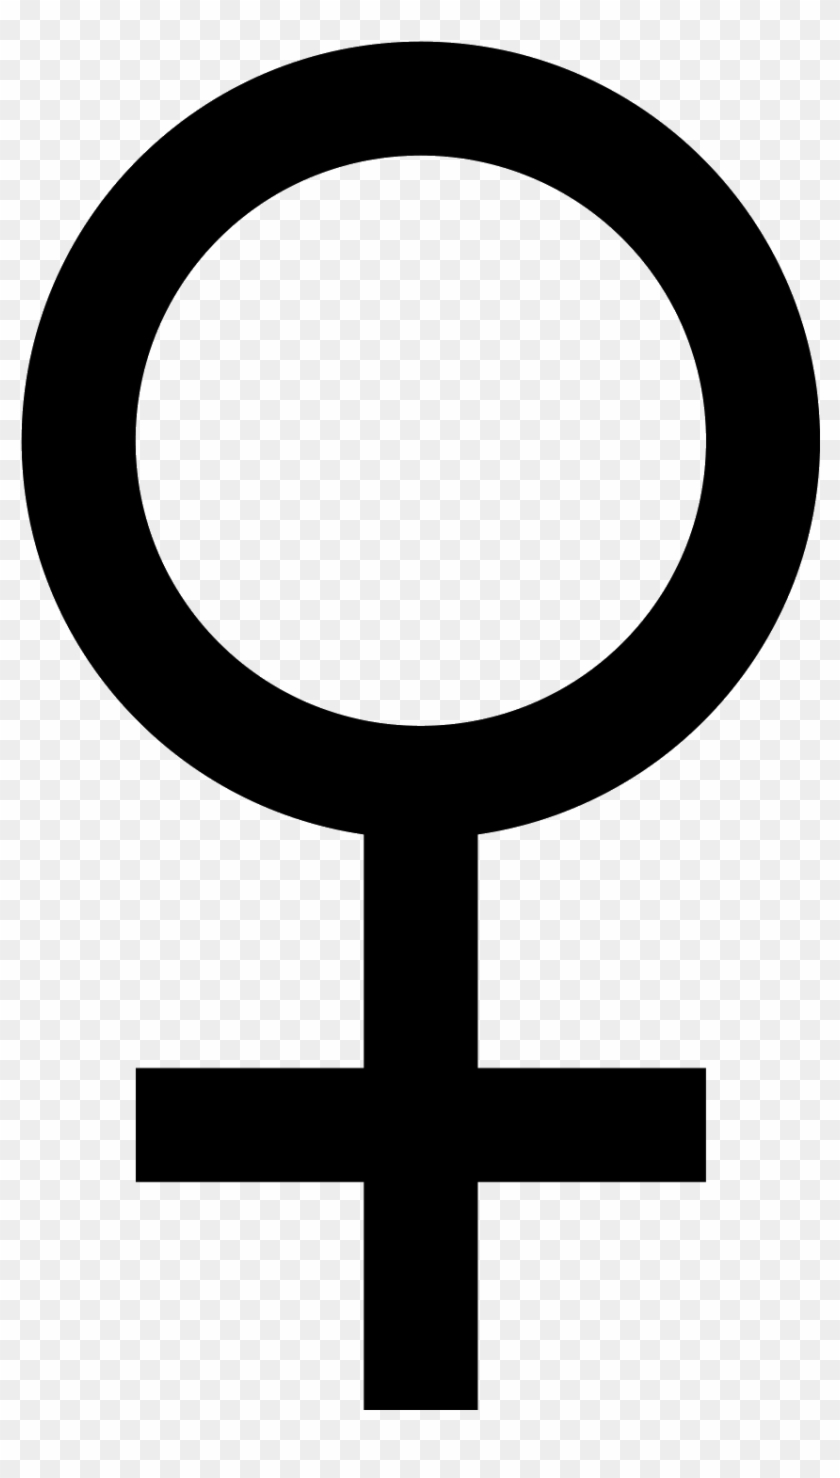 It Is The Symbol For Females, Opposite Of The Male - Female Icon #840495